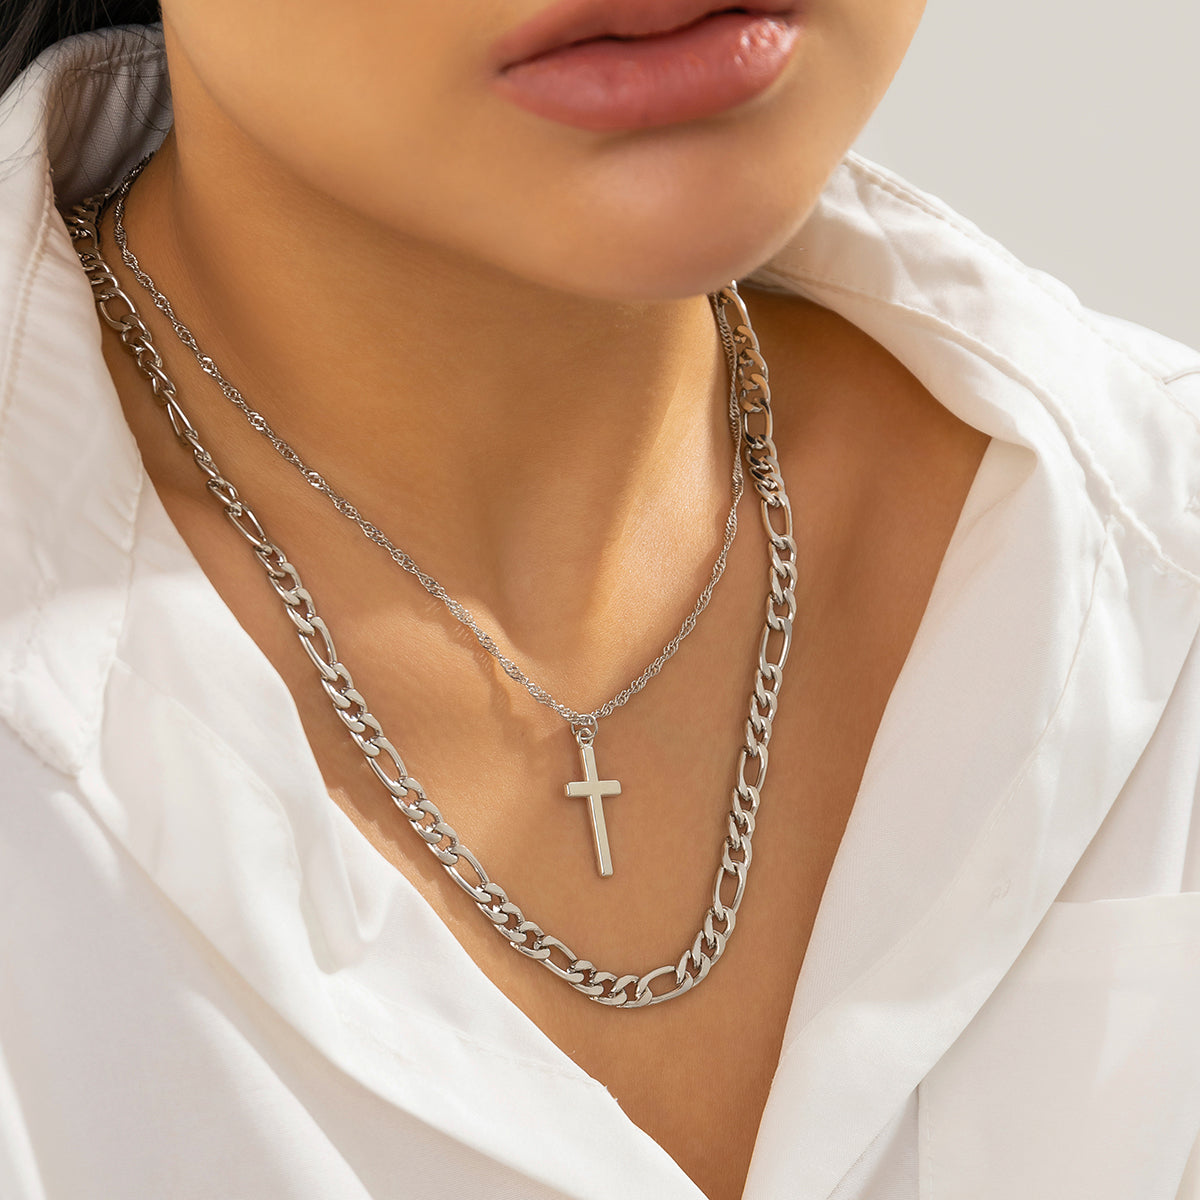 Silver-Plated Cross Pendant Necklace Set